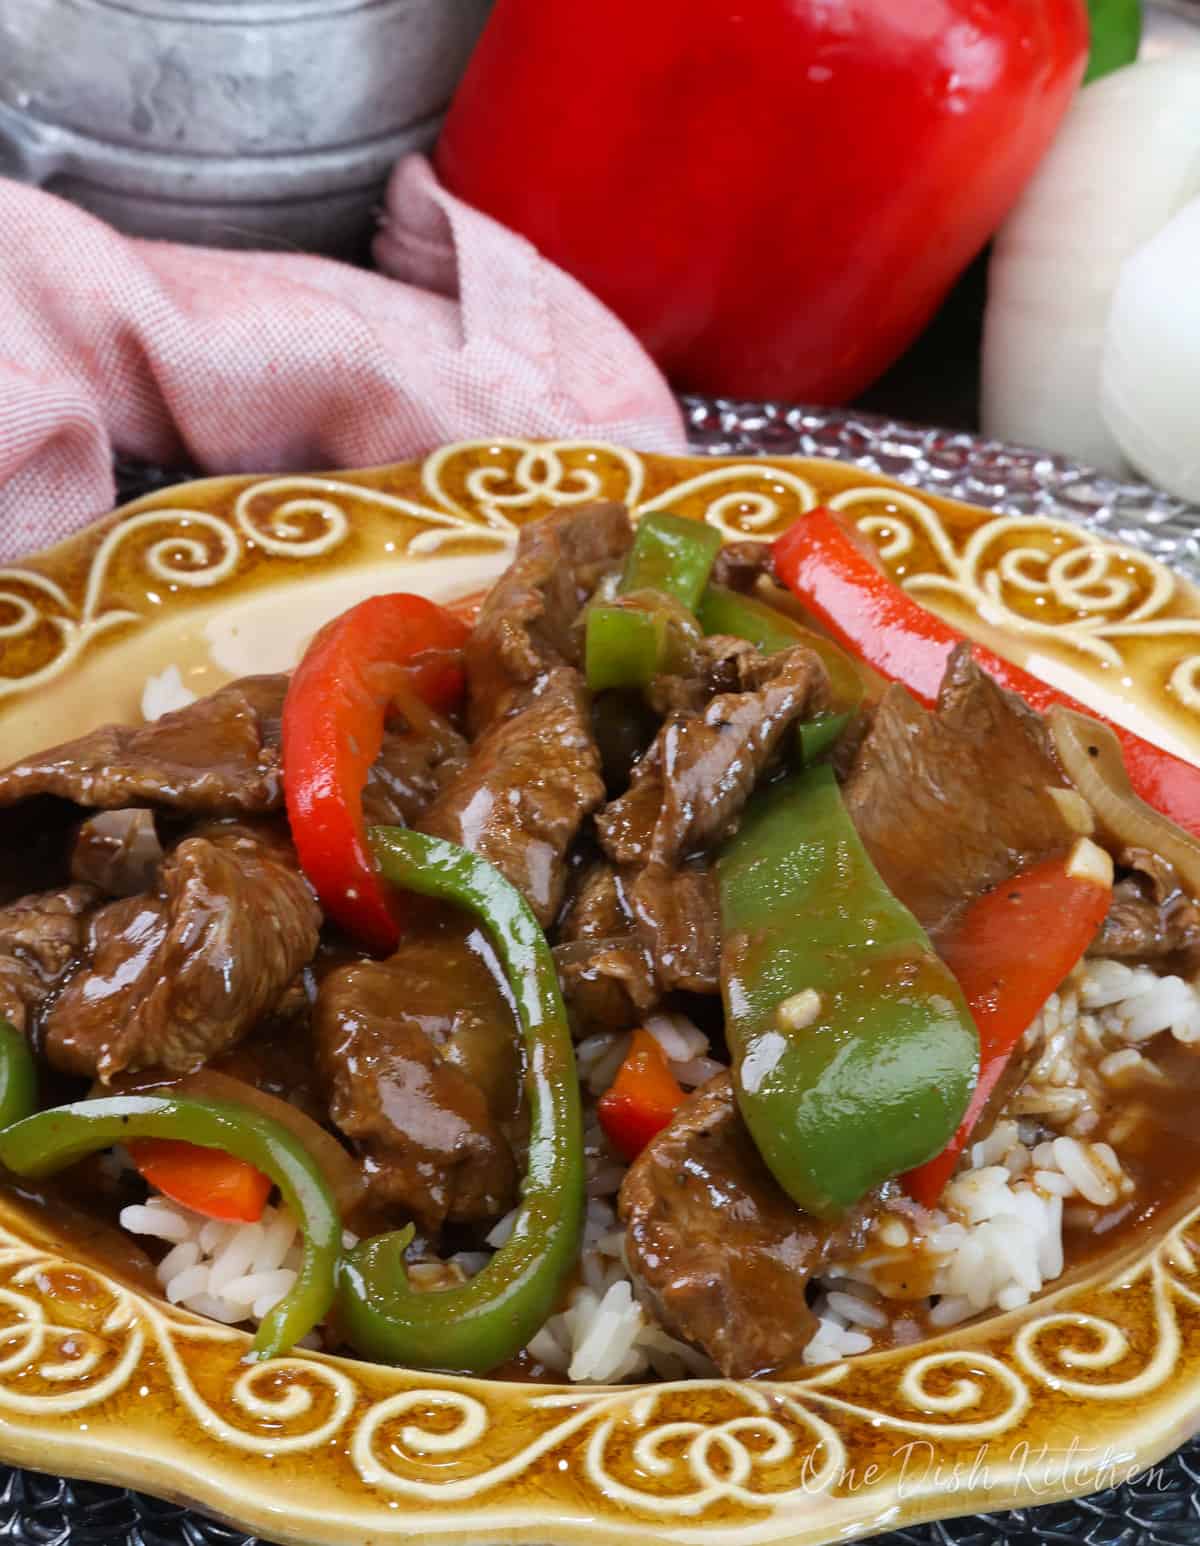 a single serving of pepper steak with red and green bell peppers served on a gold plate.